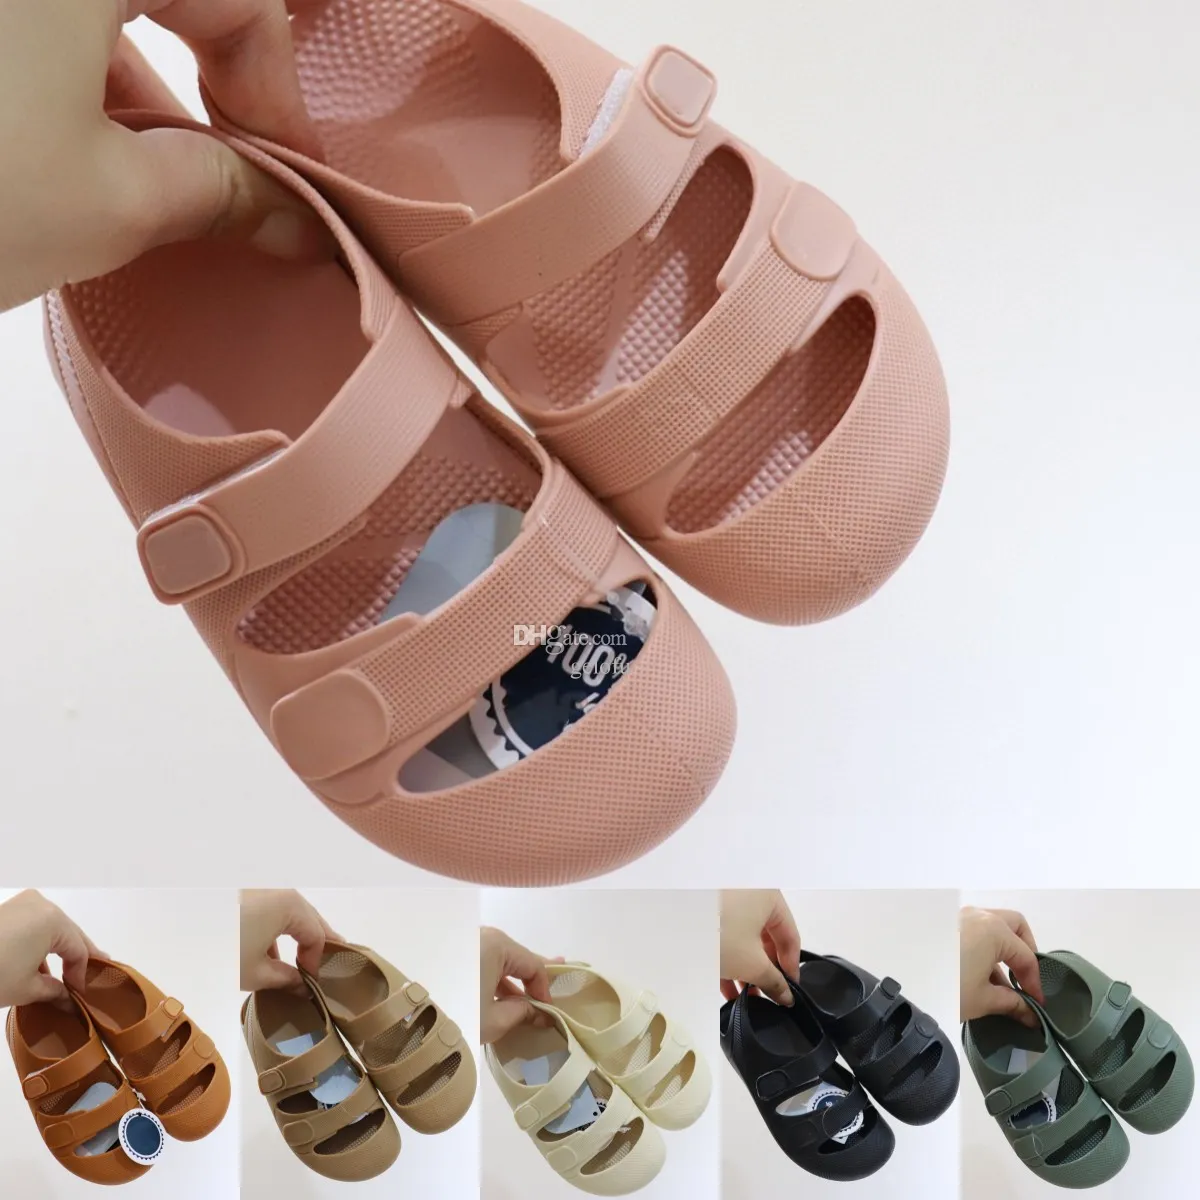 Kids Shoes Toe Sandals Classic Igors Spain Brand Beach Outdoor Summer Children Slippers Flip Flop Casual Toddler Kid Sandal Boys Girls Youth Sof